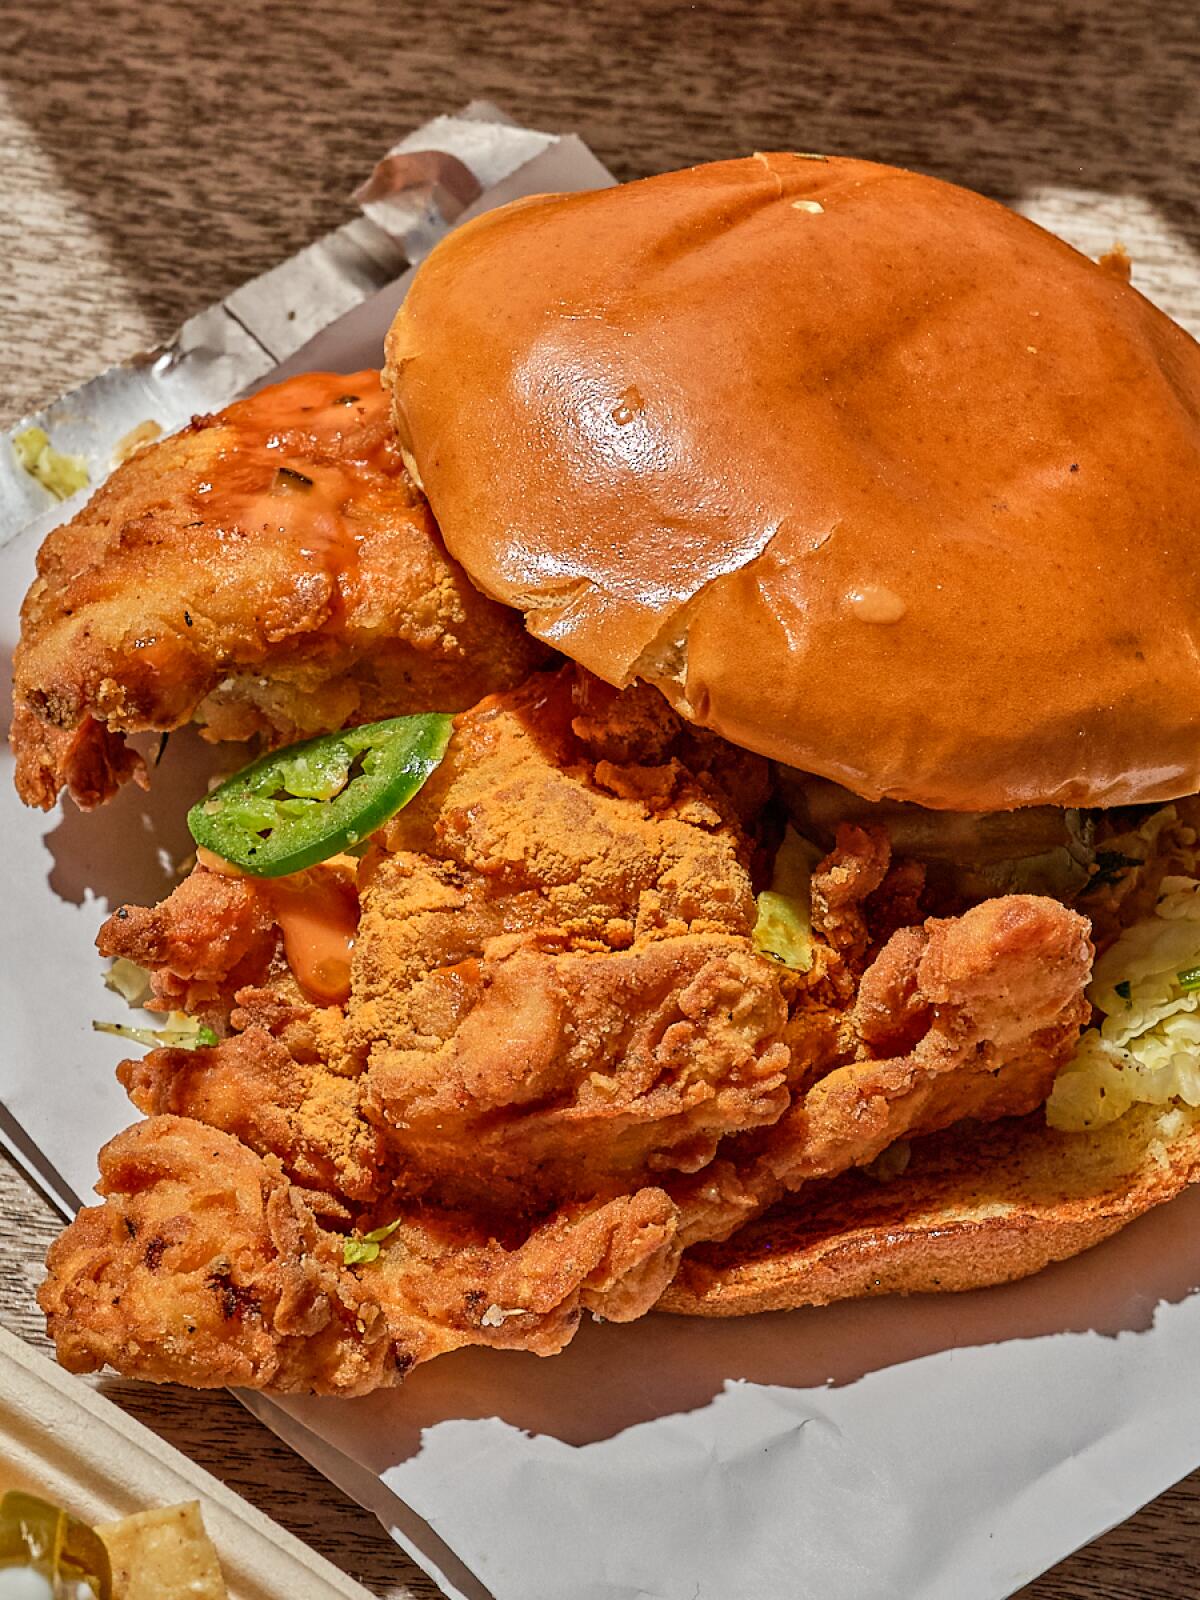 Closeup of a sandwich with hamburger bun, fried chicken and a jalepeo slice.